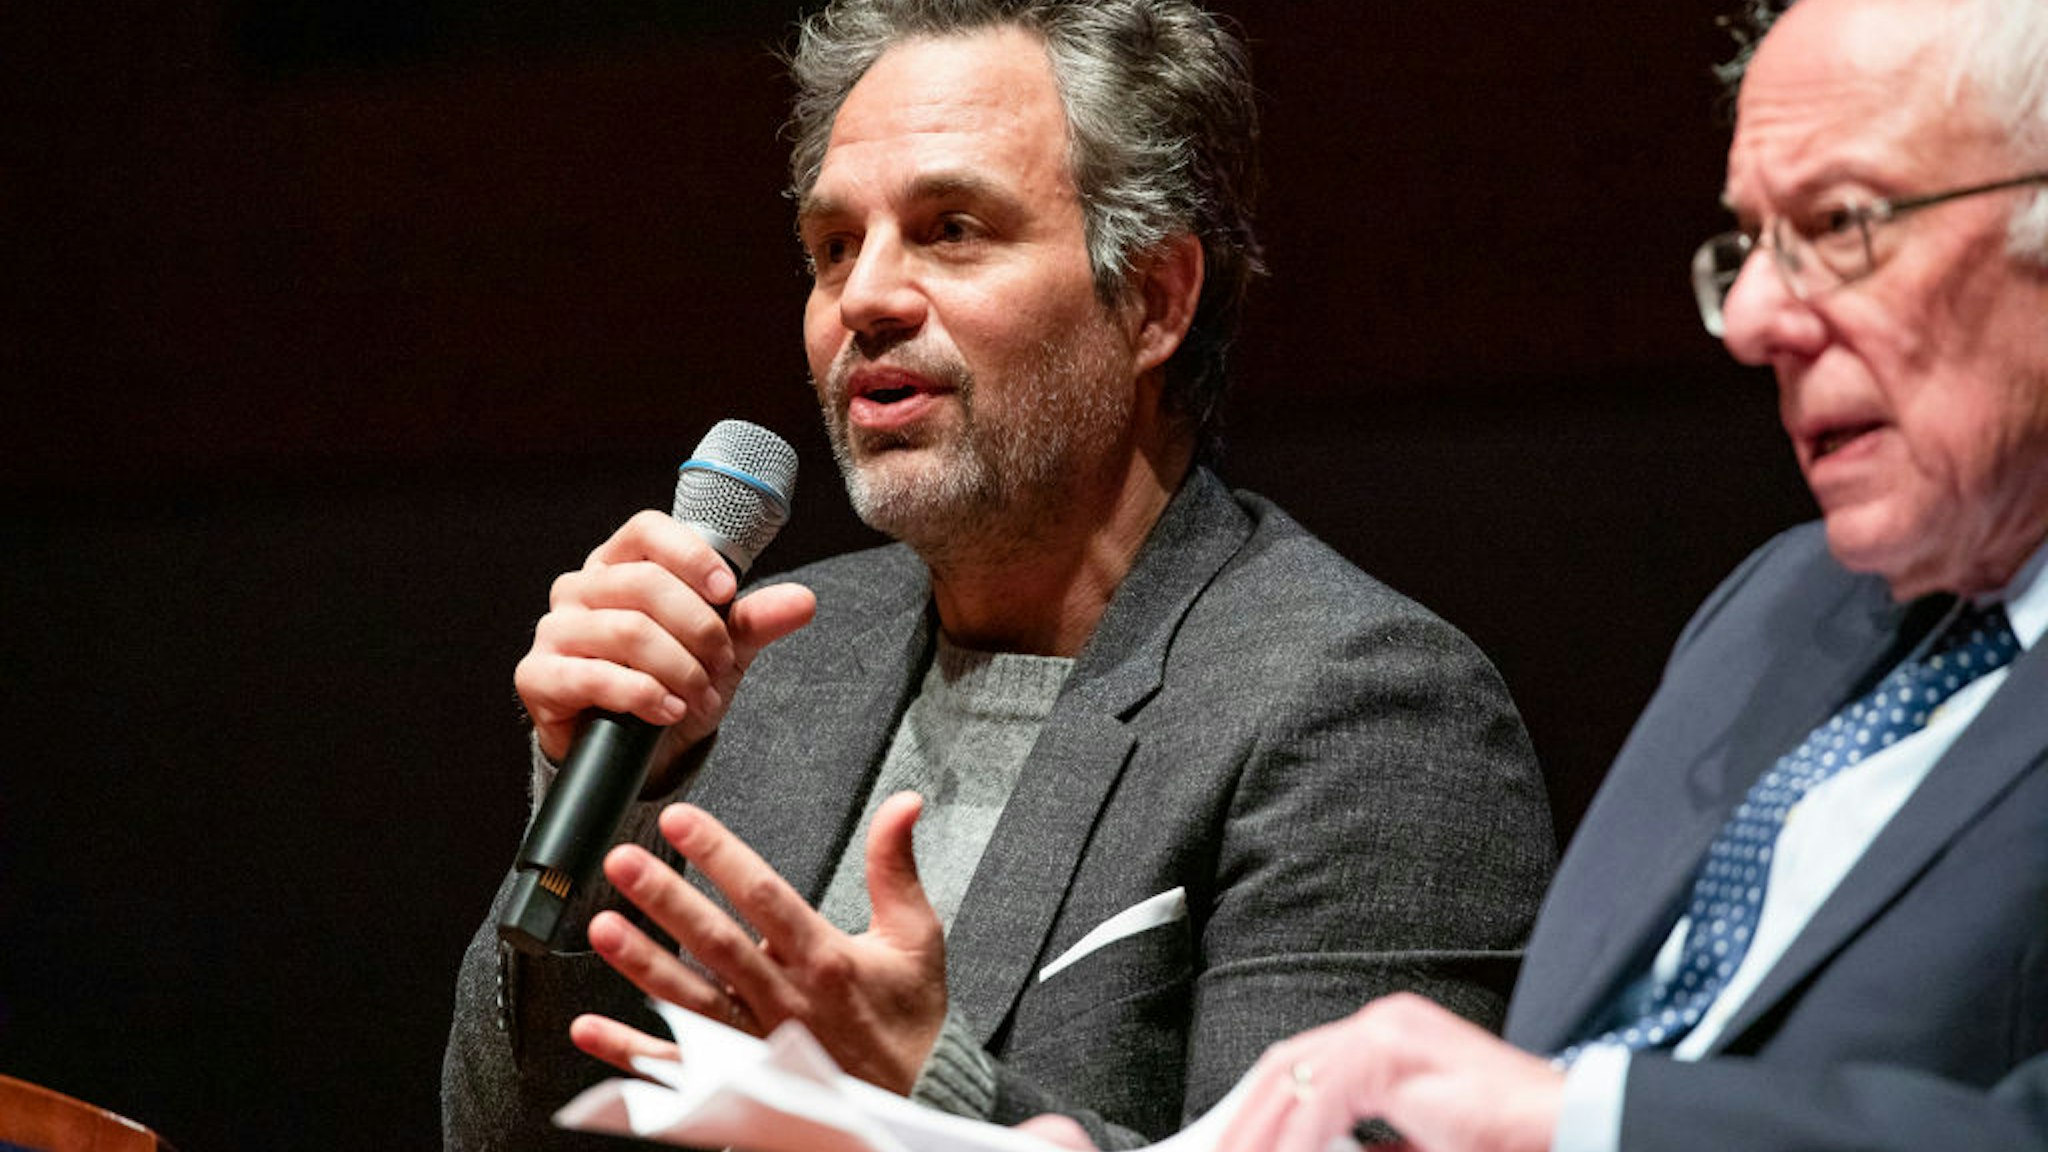 Democratic presidential candidate Sen. Bernie Sanders (I-VT) and actor Mark Ruffalo participate in a roundtable discussion at the U.S. Capitol on strategies to combat the widespread contamination of America's drinking water on January 29, 2020 in Washington, DC.